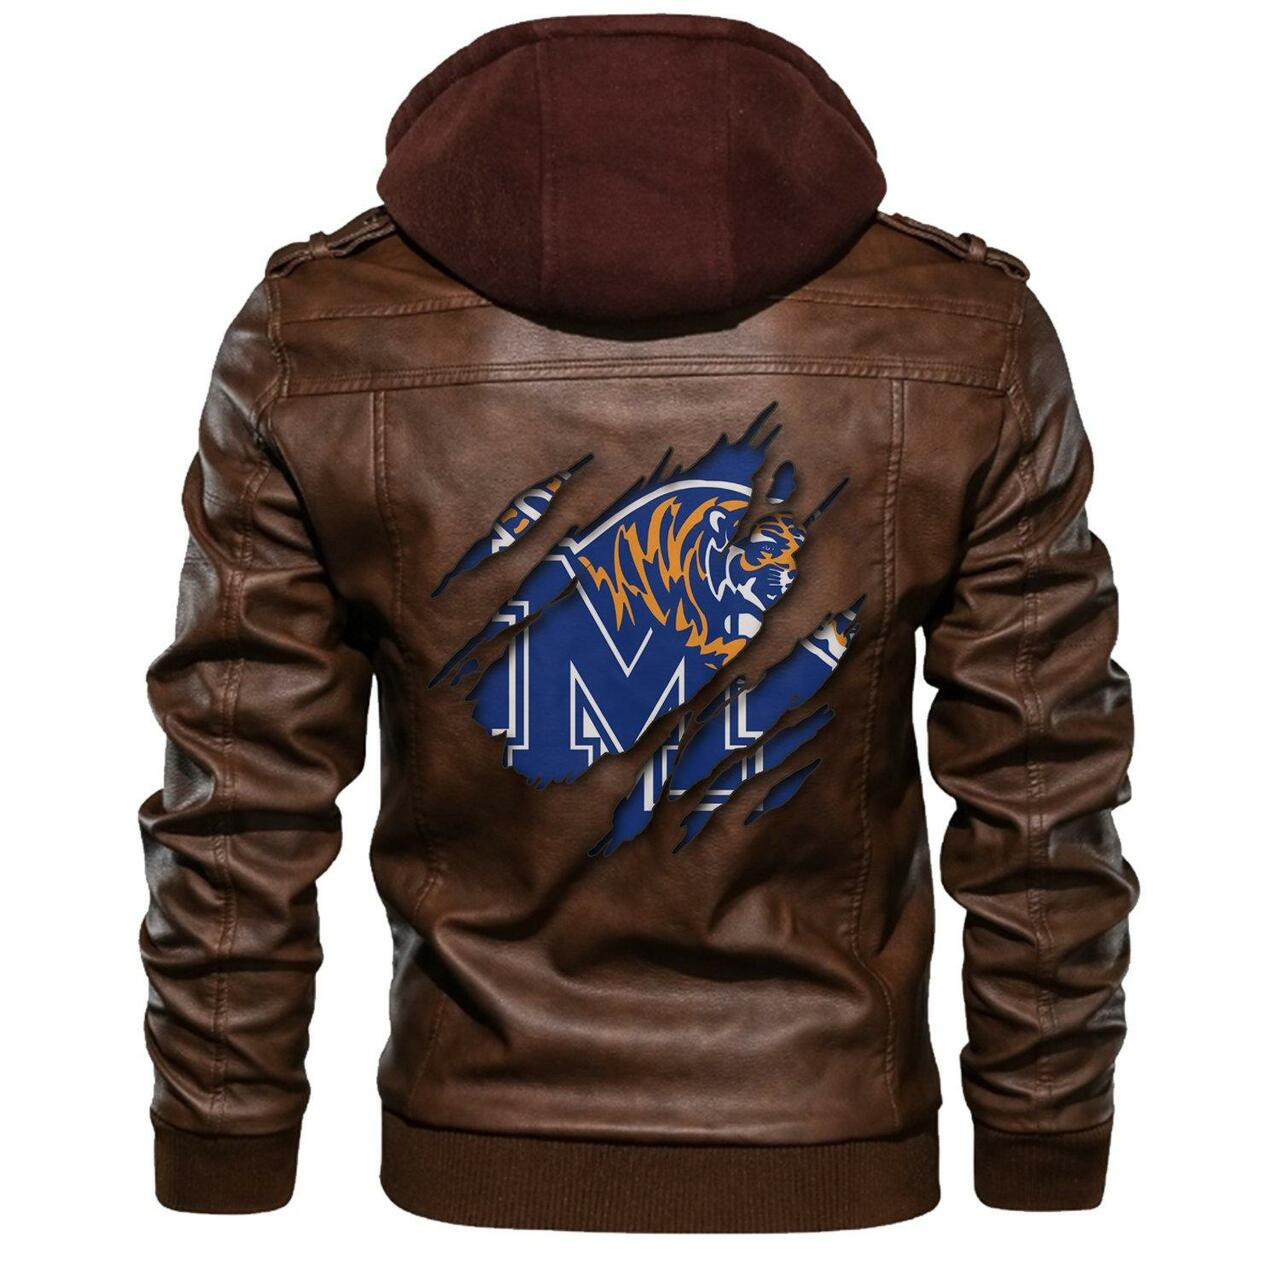 Top 200+ leather jacket so cool for your man 241